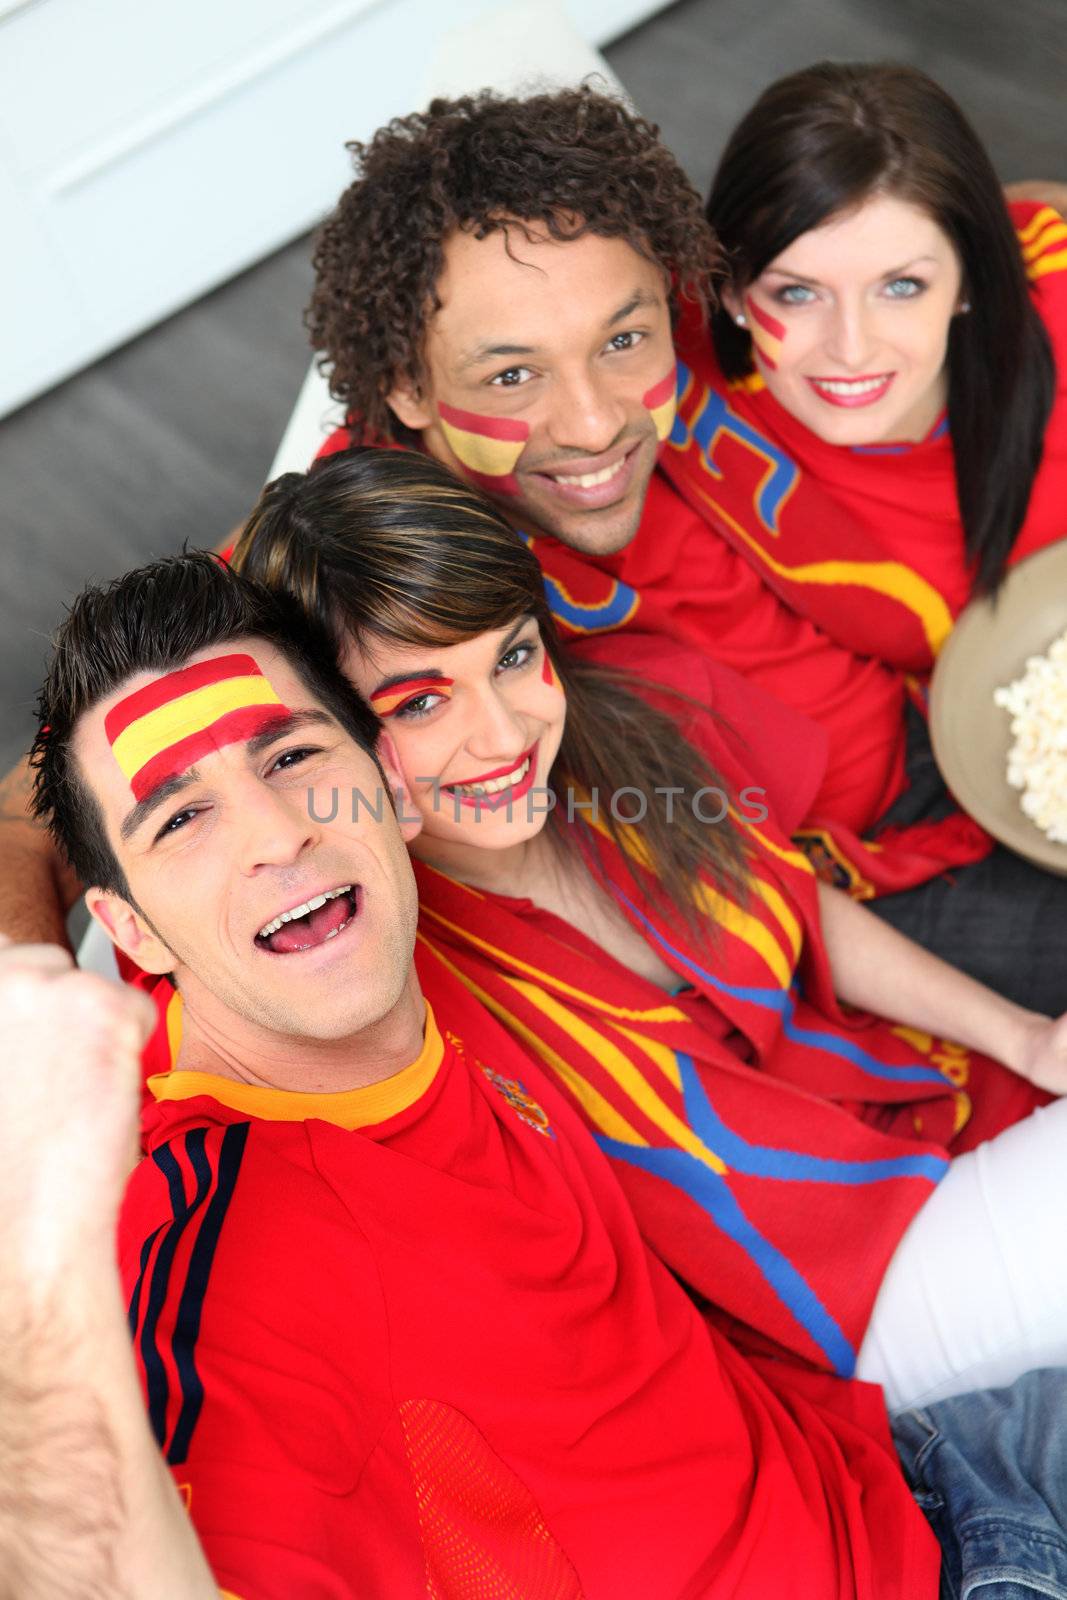 Spanish football fans at home by phovoir